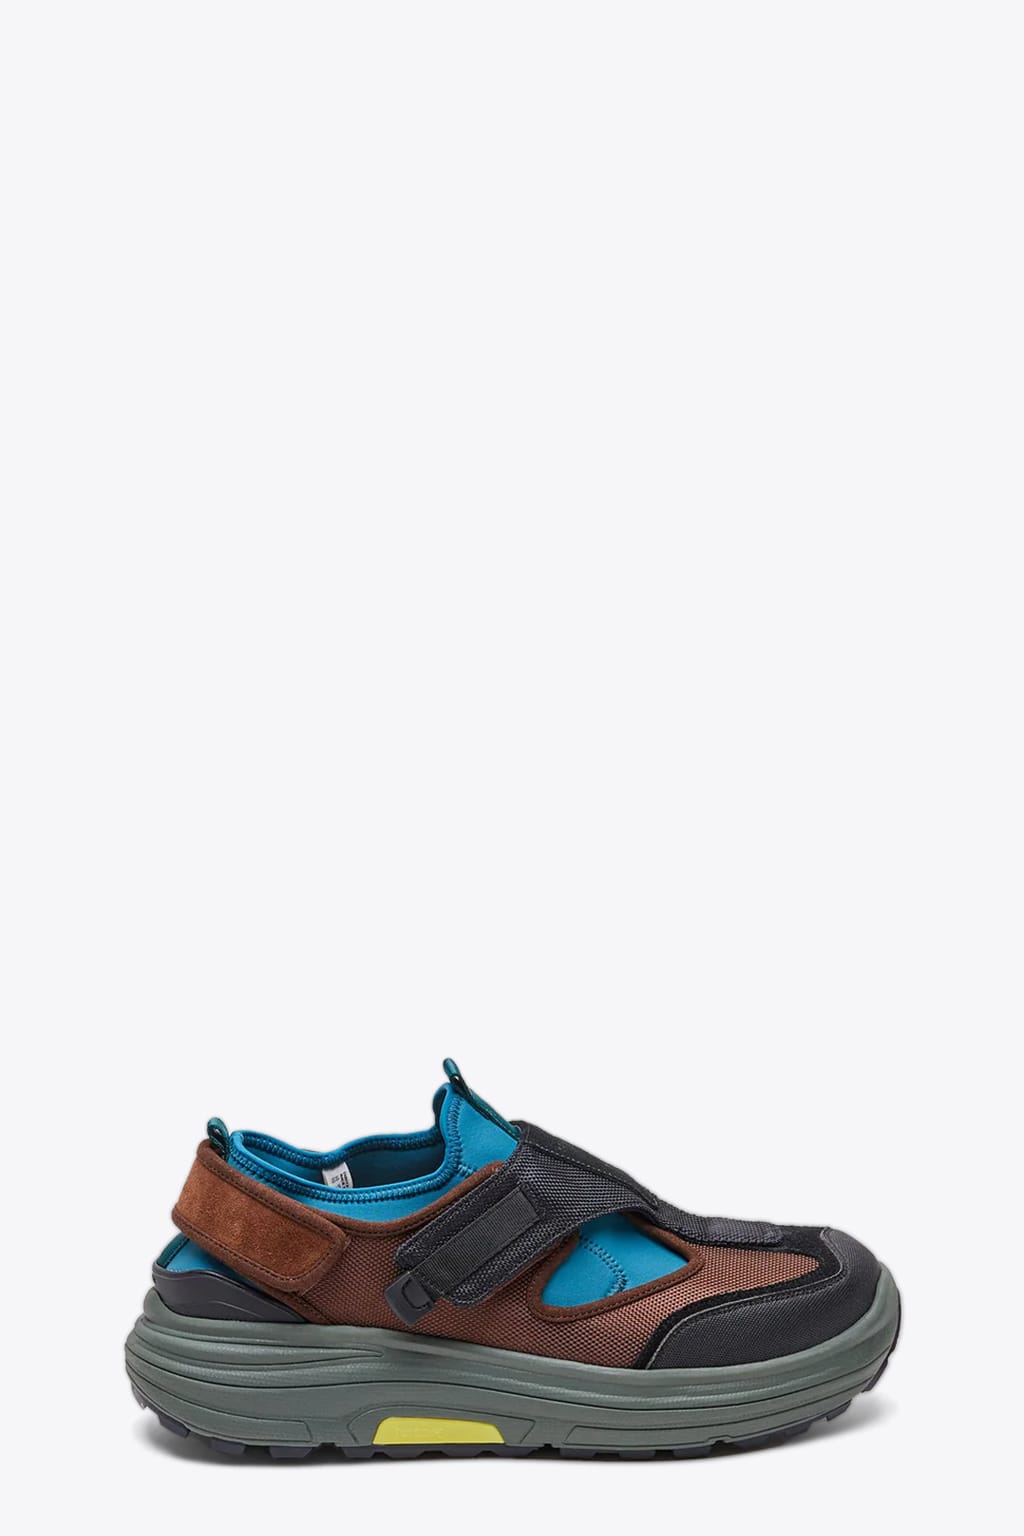 SUICOKE TRED MULTICOLOR LAYERED LOW SNEAKER - TRED